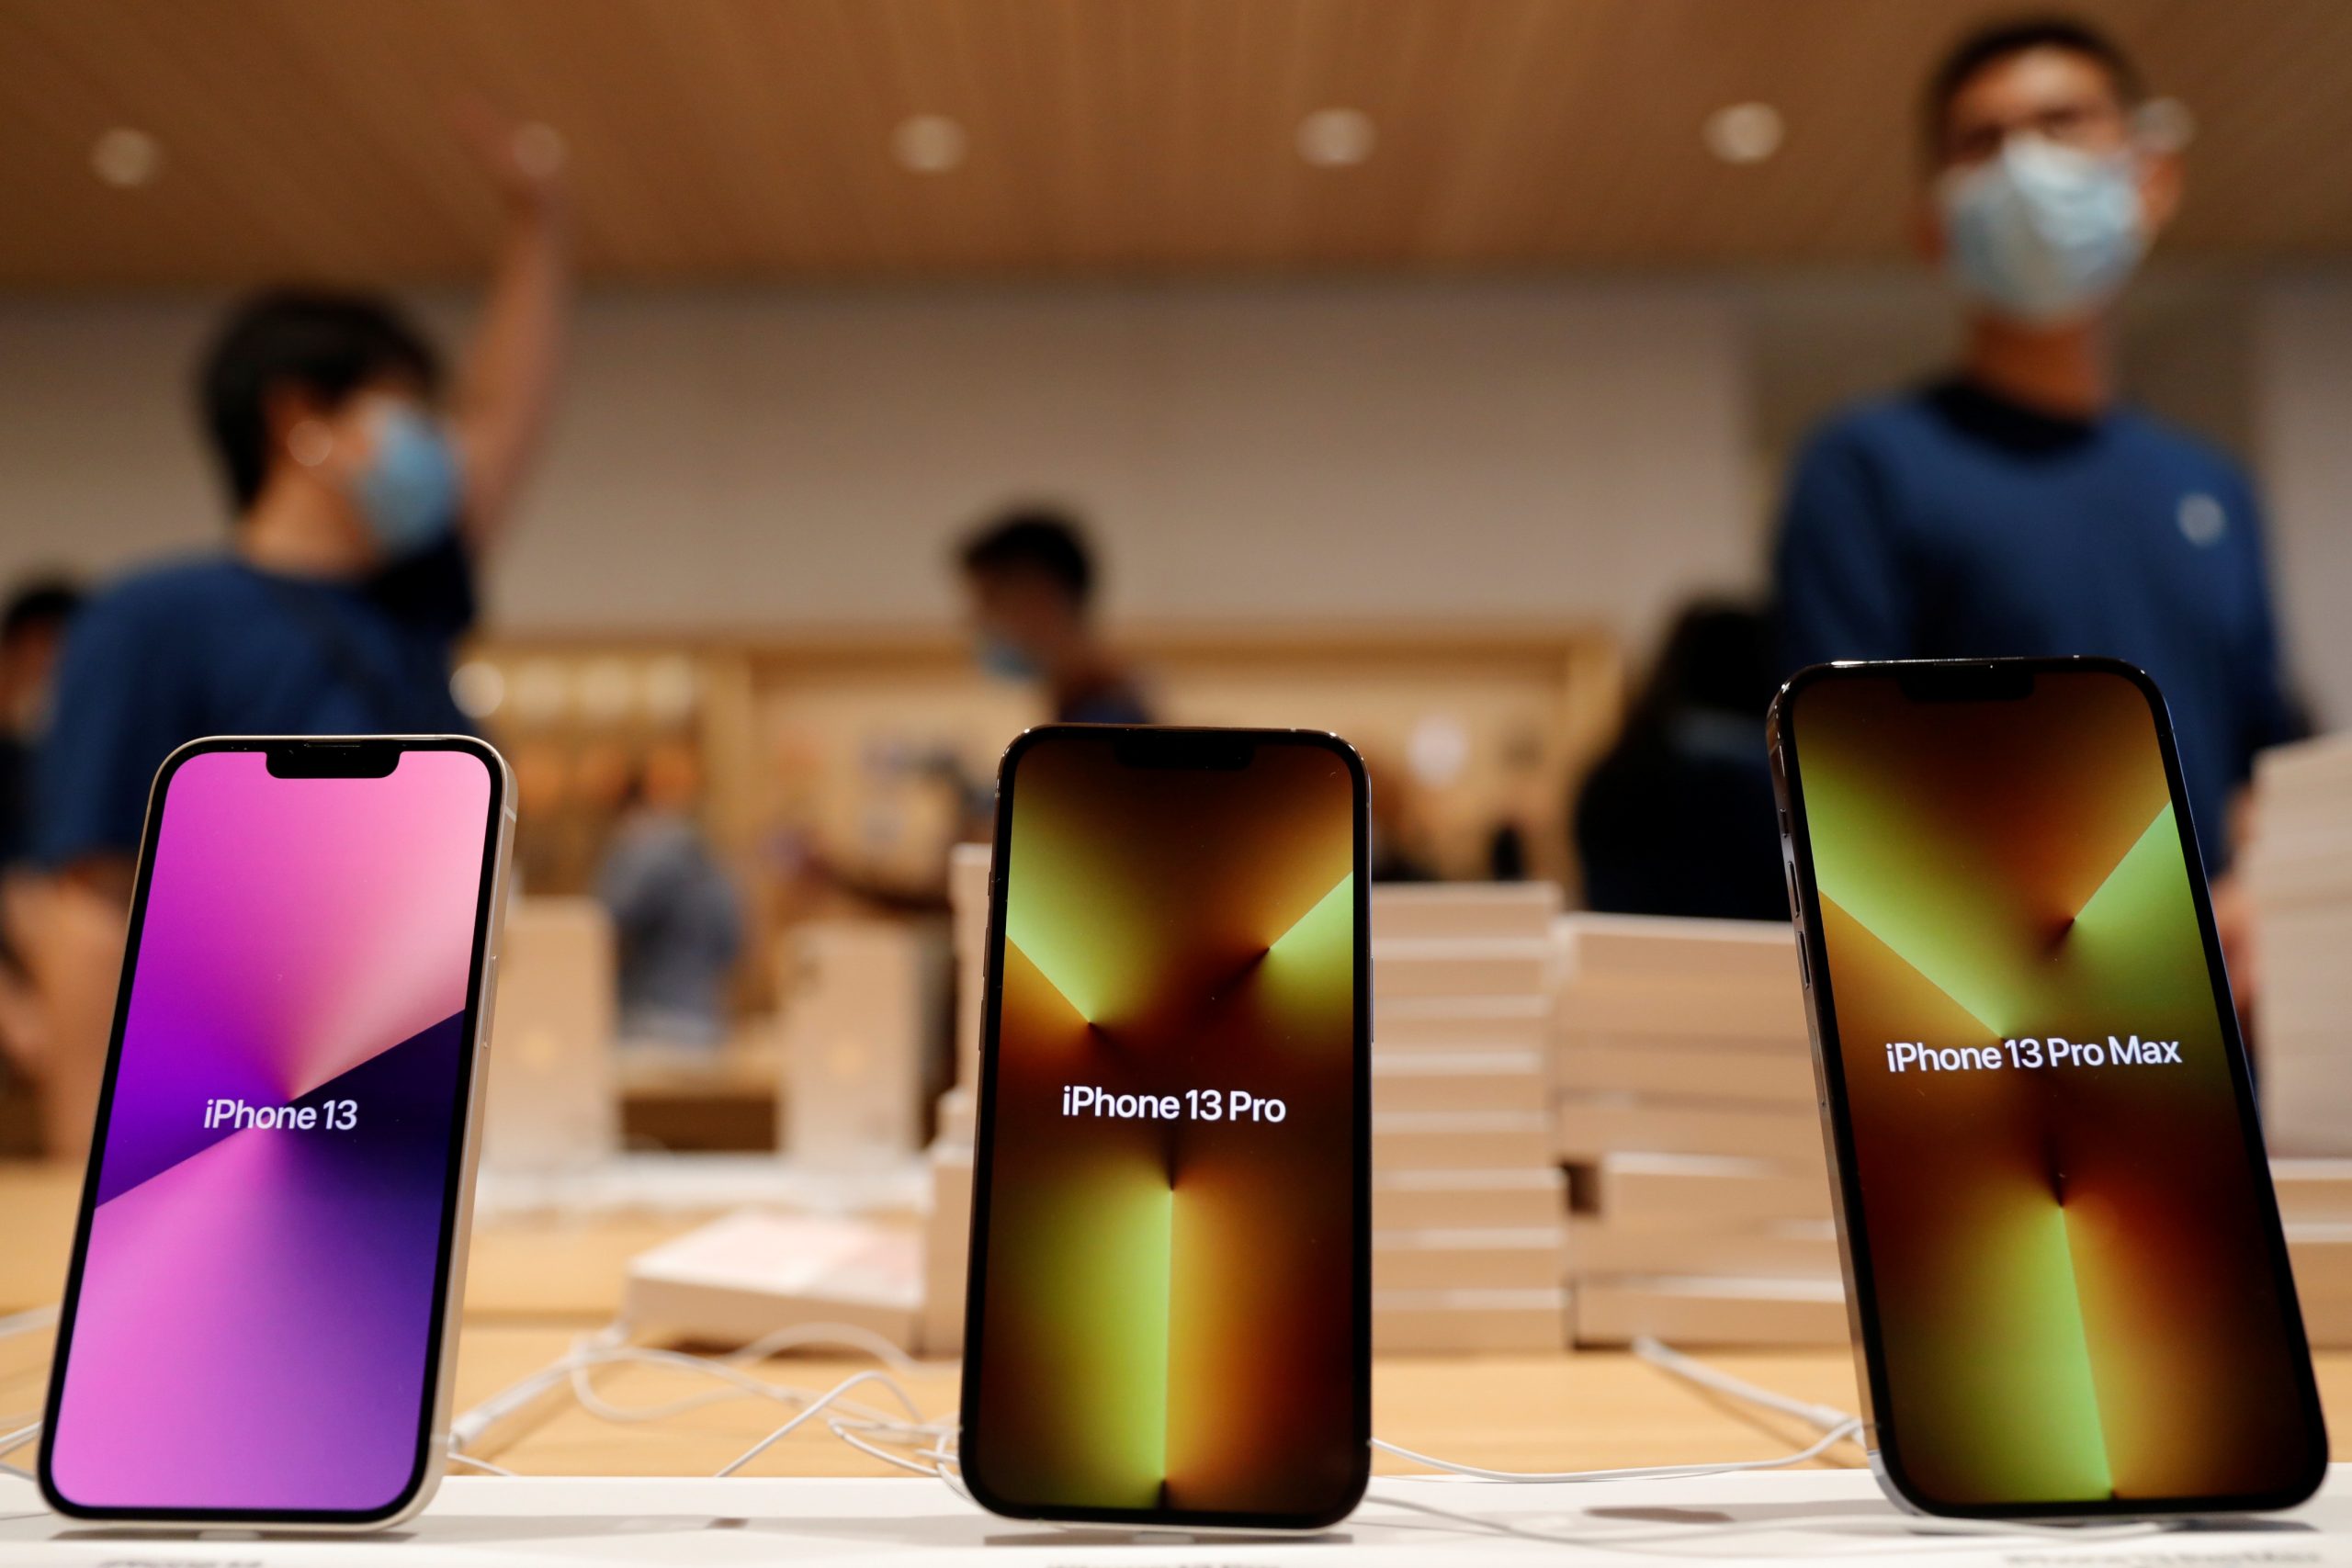 Apple tells suppliers iPhone demand has slowed as holidays near